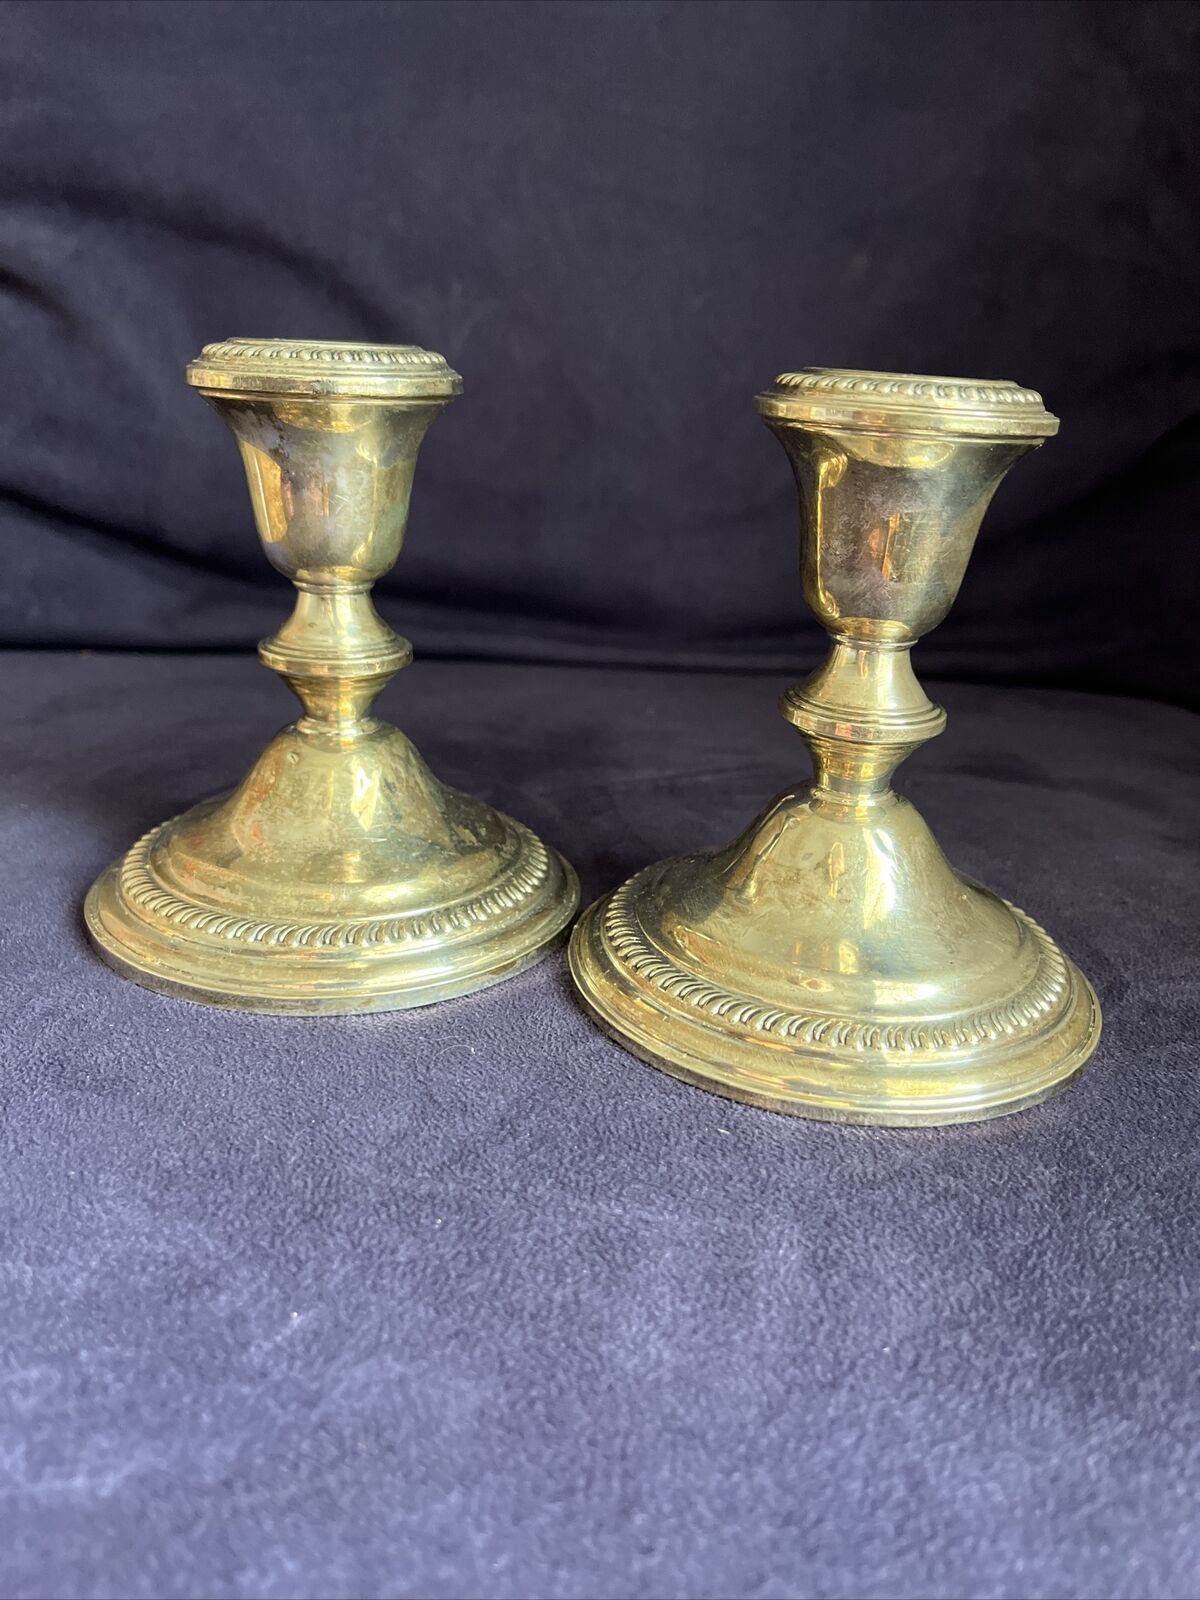 Antique Valuations: Pair of Vintage Empire Sterling Silver Weighted Candle Holders